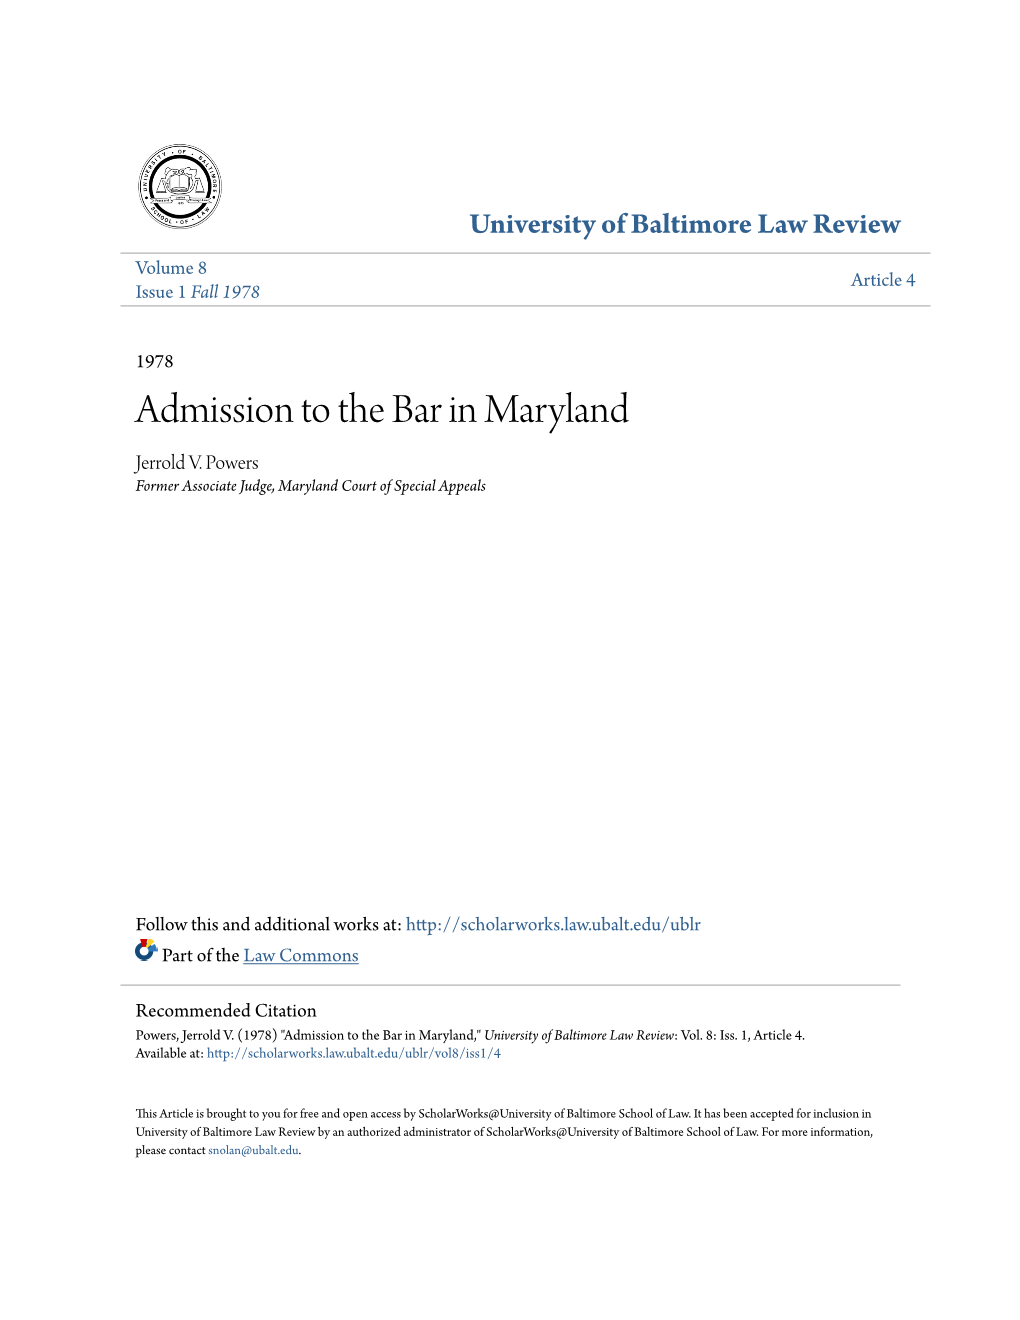 Admission to the Bar in Maryland Jerrold V